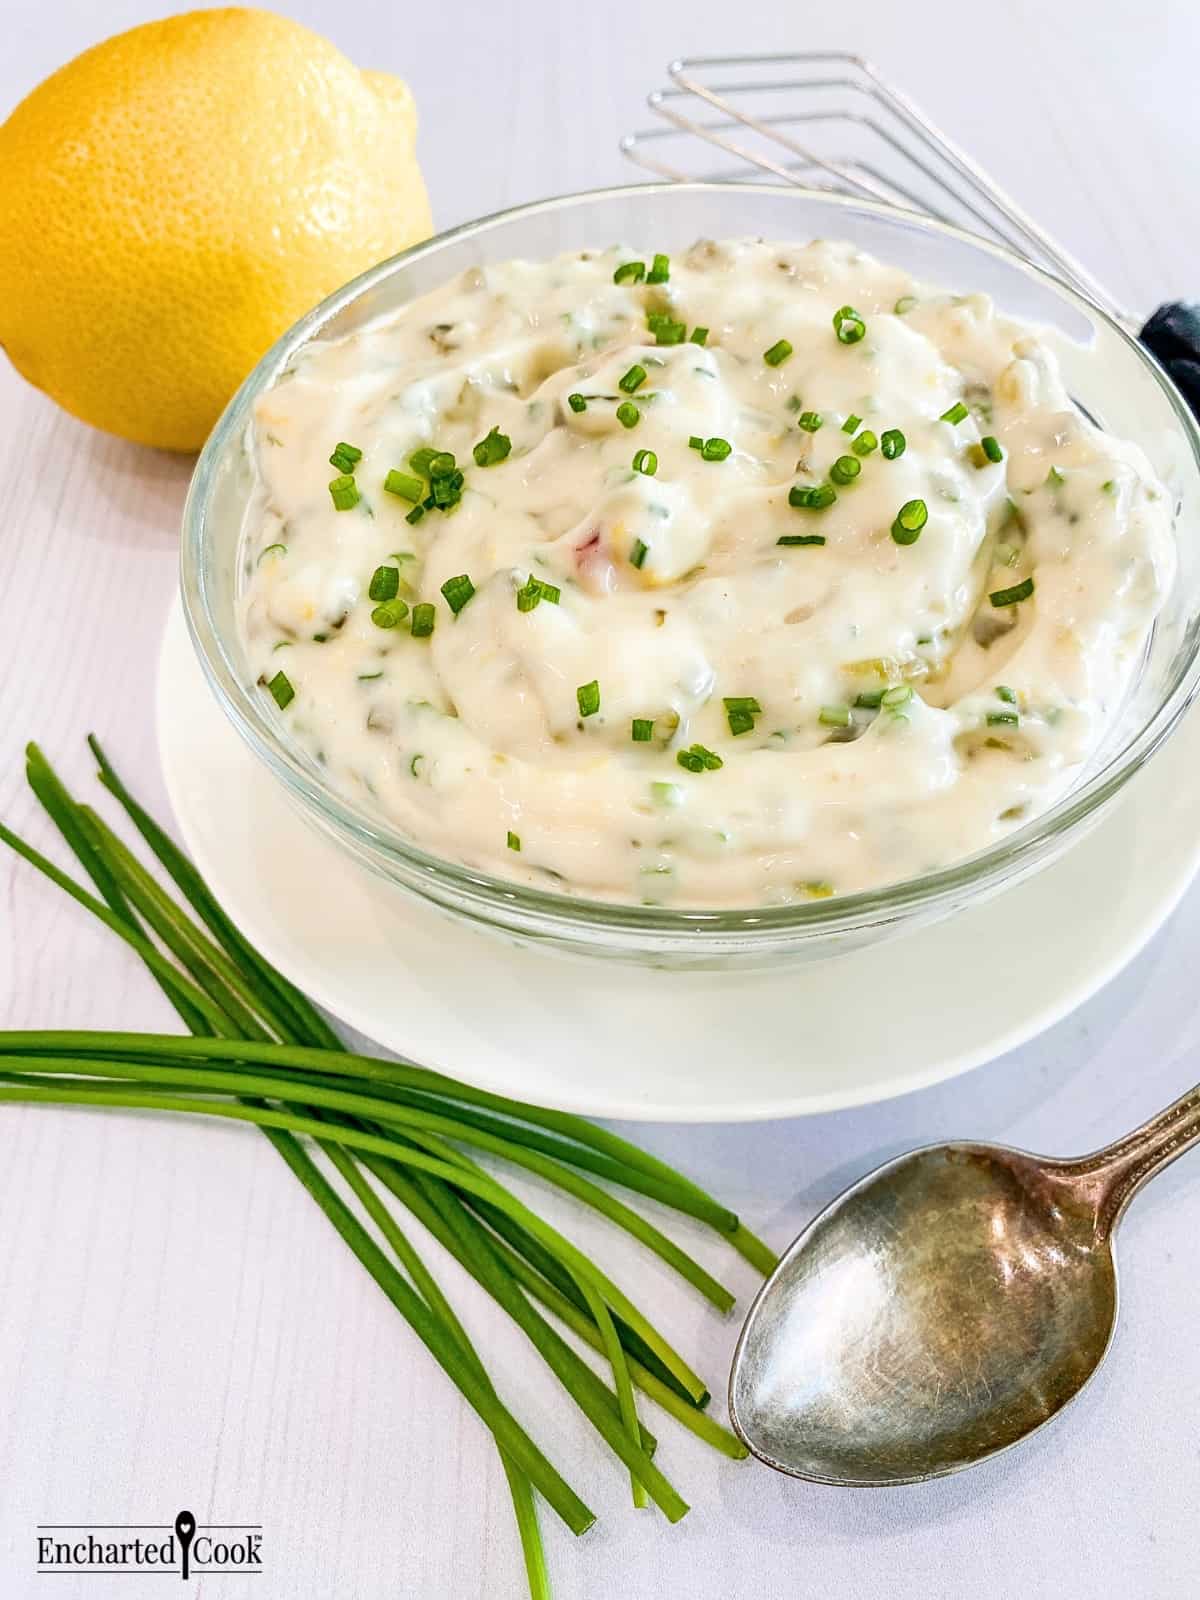 Tartar sauce in a clear glass bowl on a white plate encircled by a lemon, fresh whole chives, a small whisk, and a spoon.